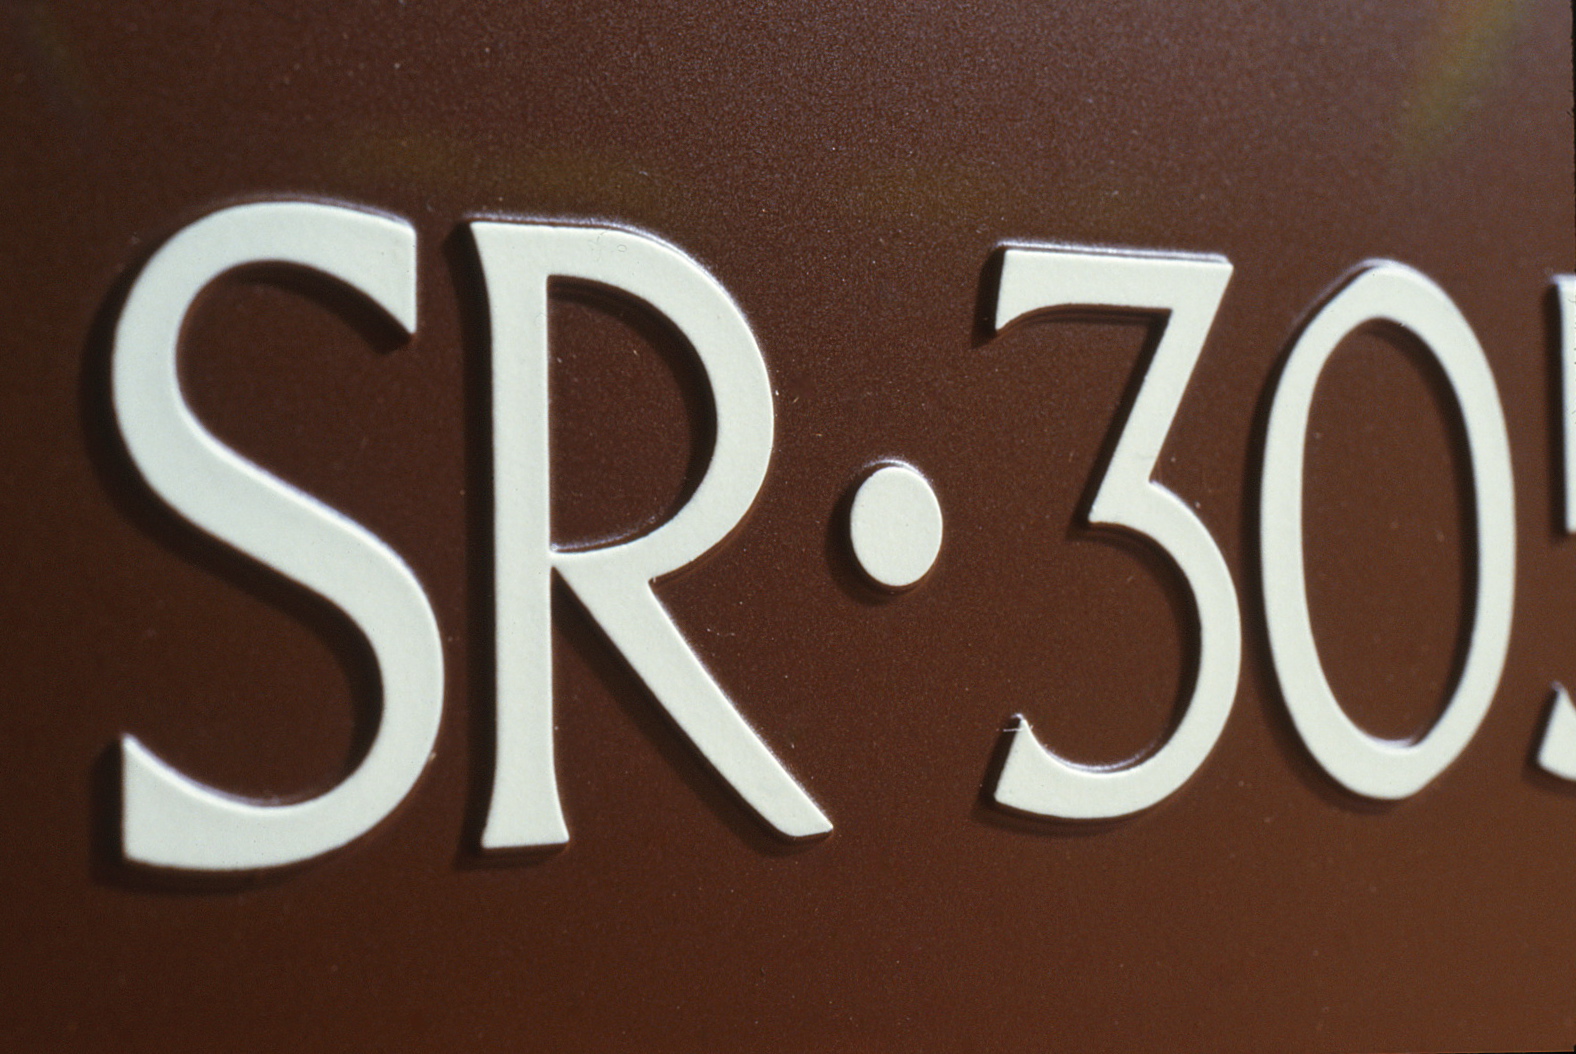 Closeup of two letters and two numbers using this font on a sign.